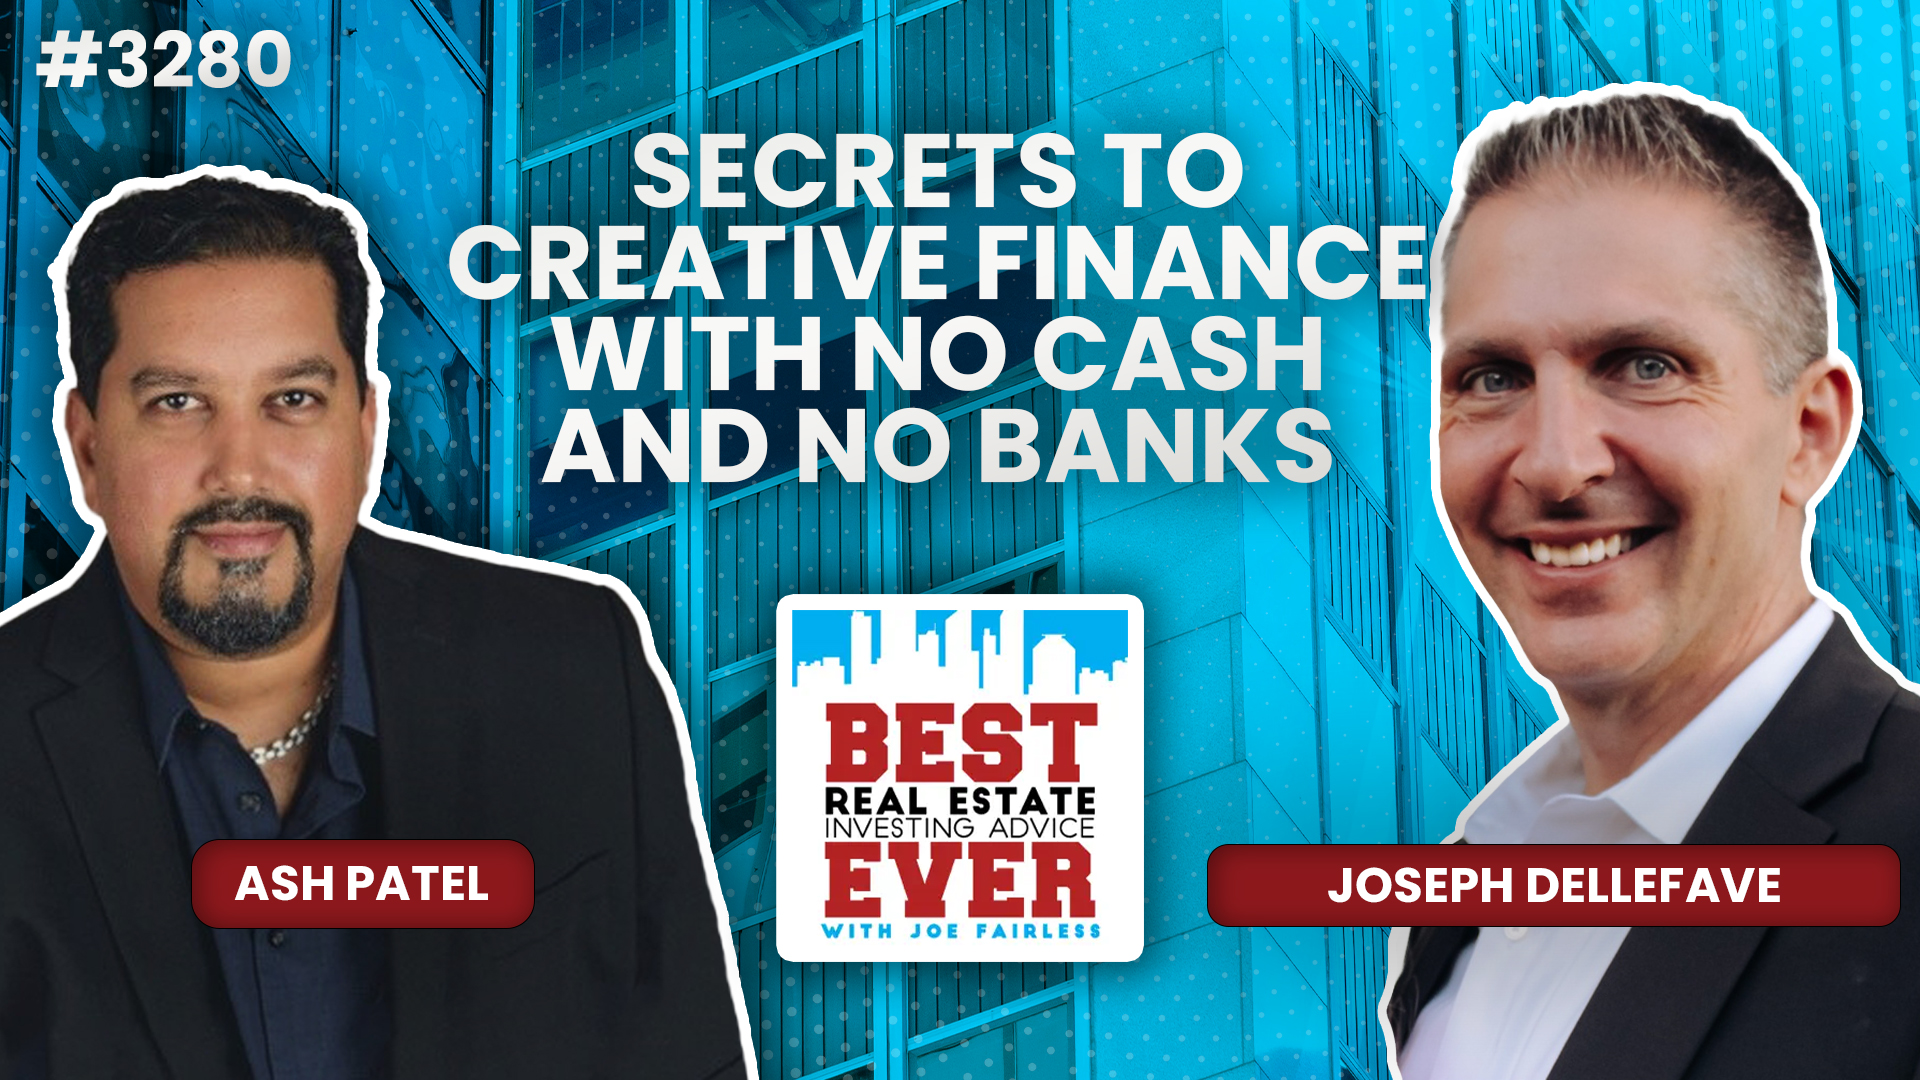 JF3280: Joseph DelleFave — Secrets to Creative Finance With No Cash and No Banks